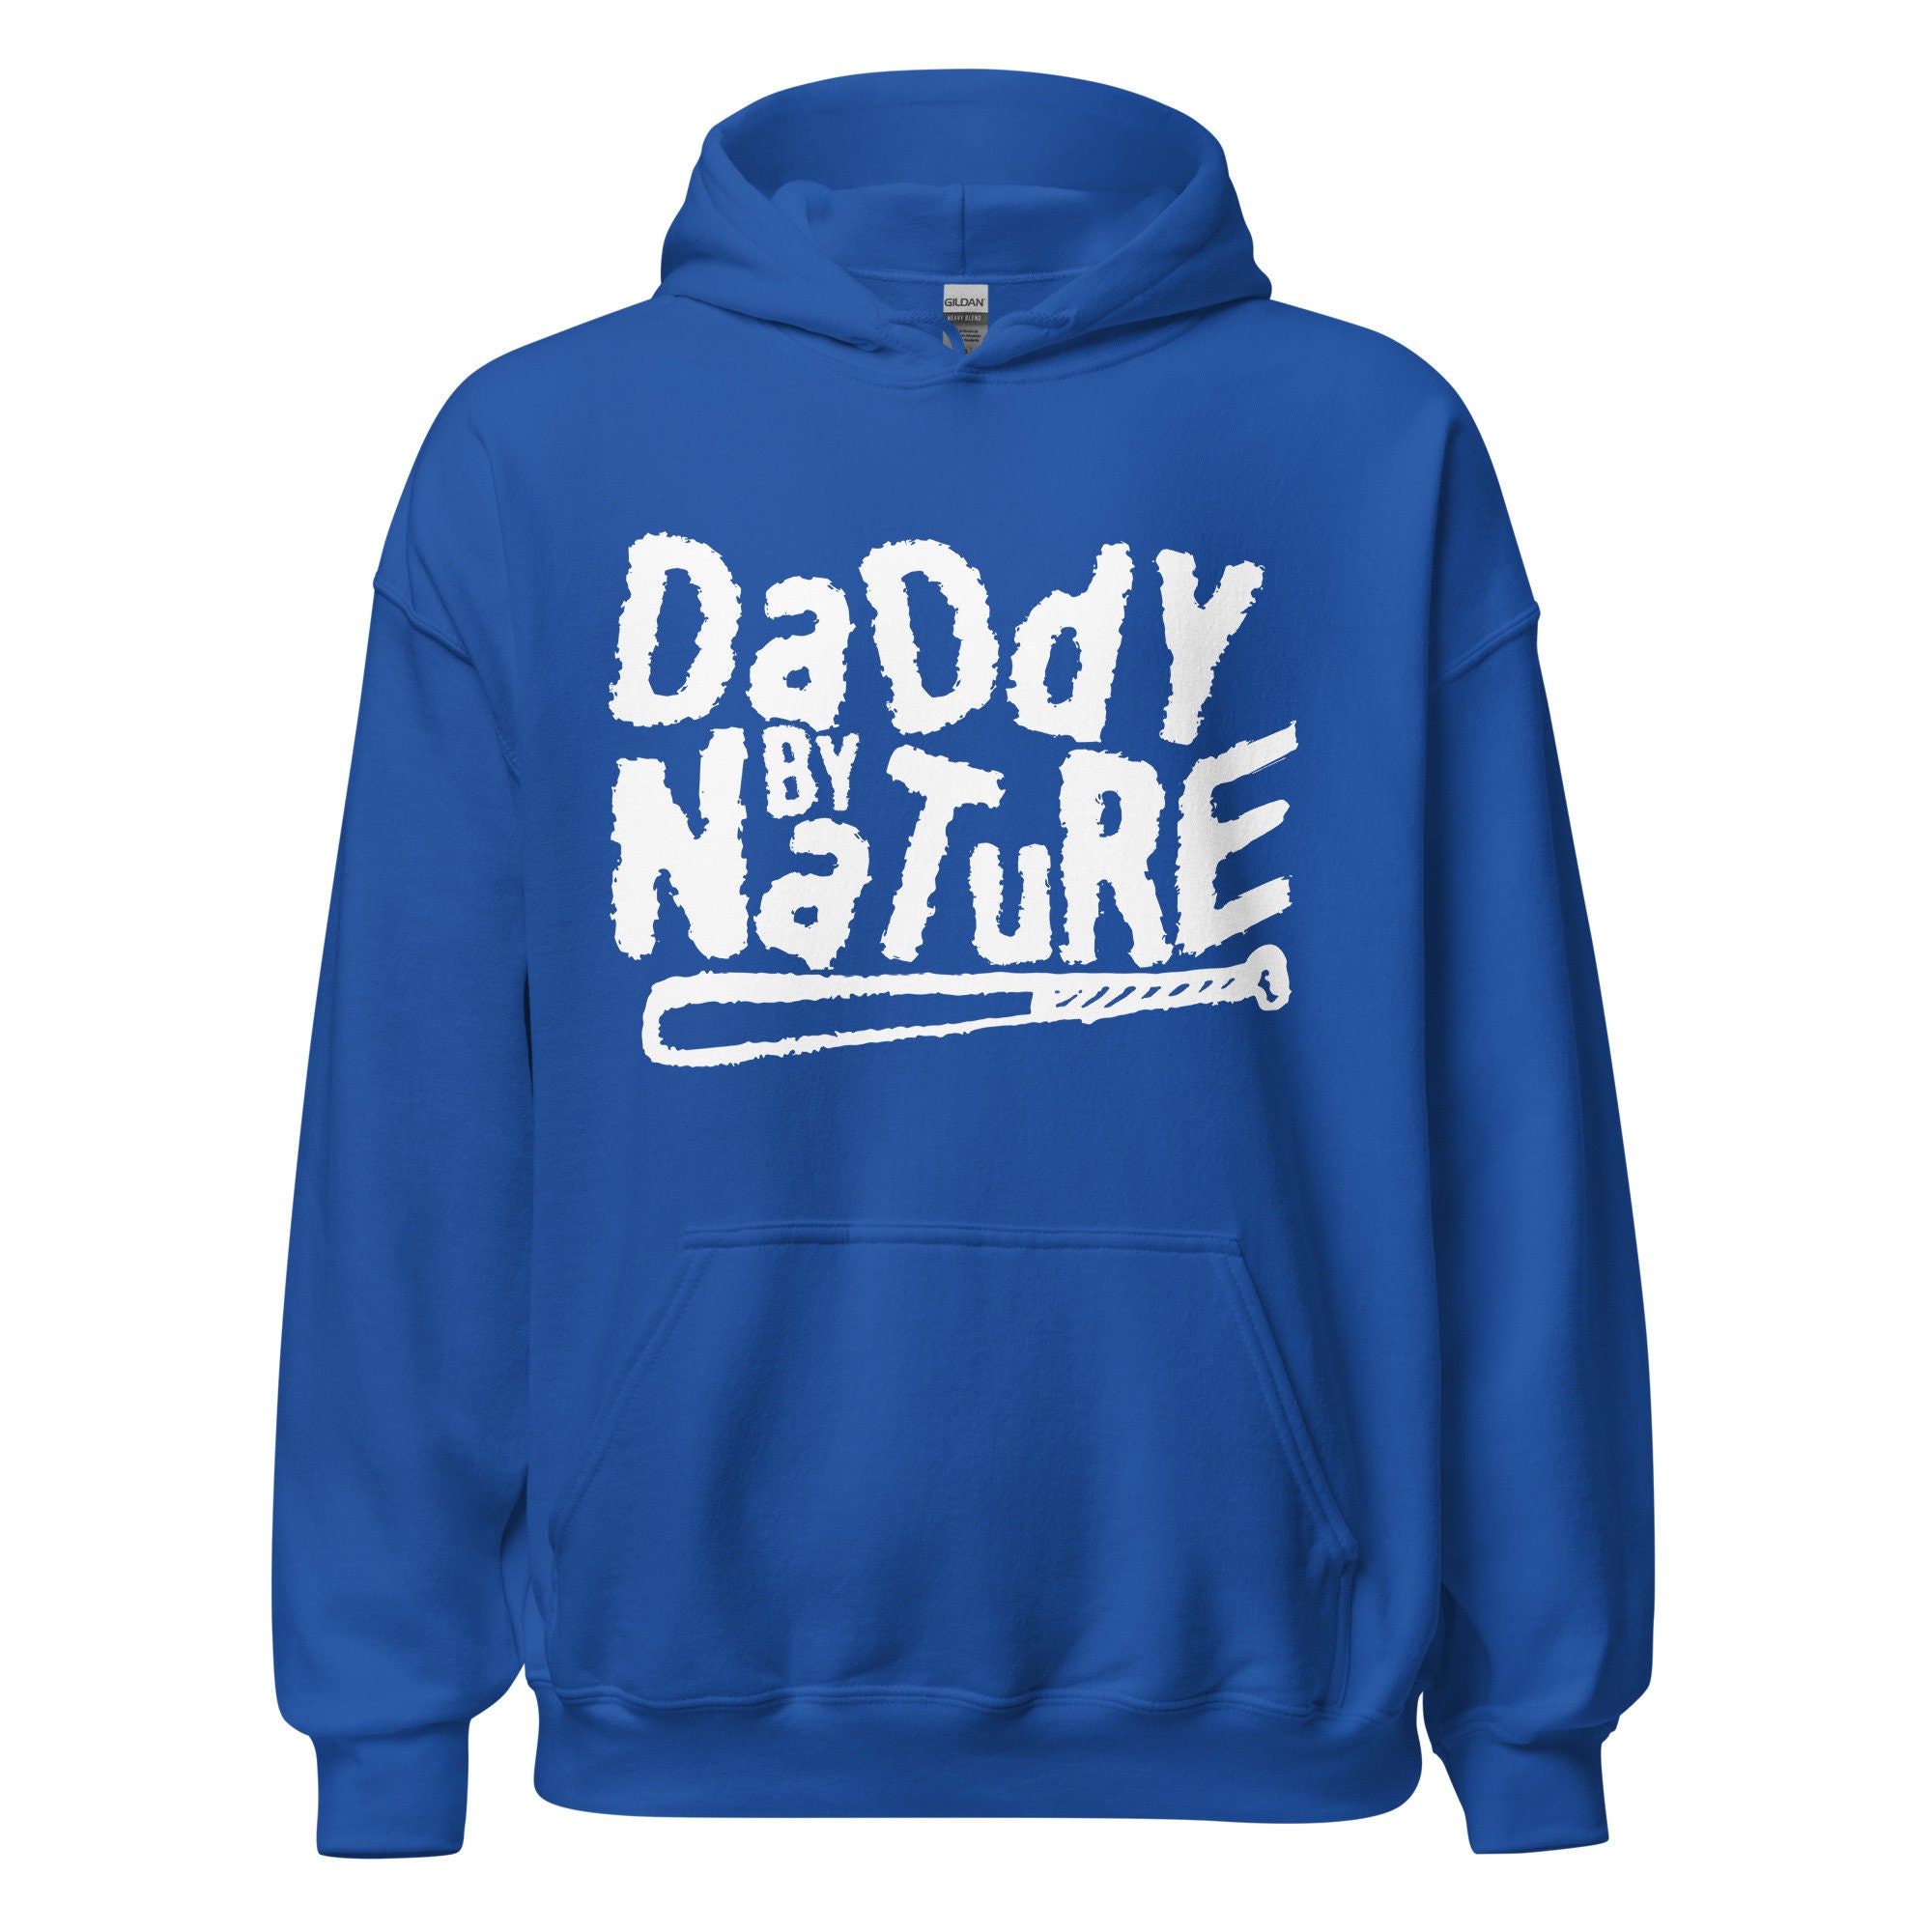 Daddy Nature Hoody Naughty by Nature Bat Gifts - Etsy